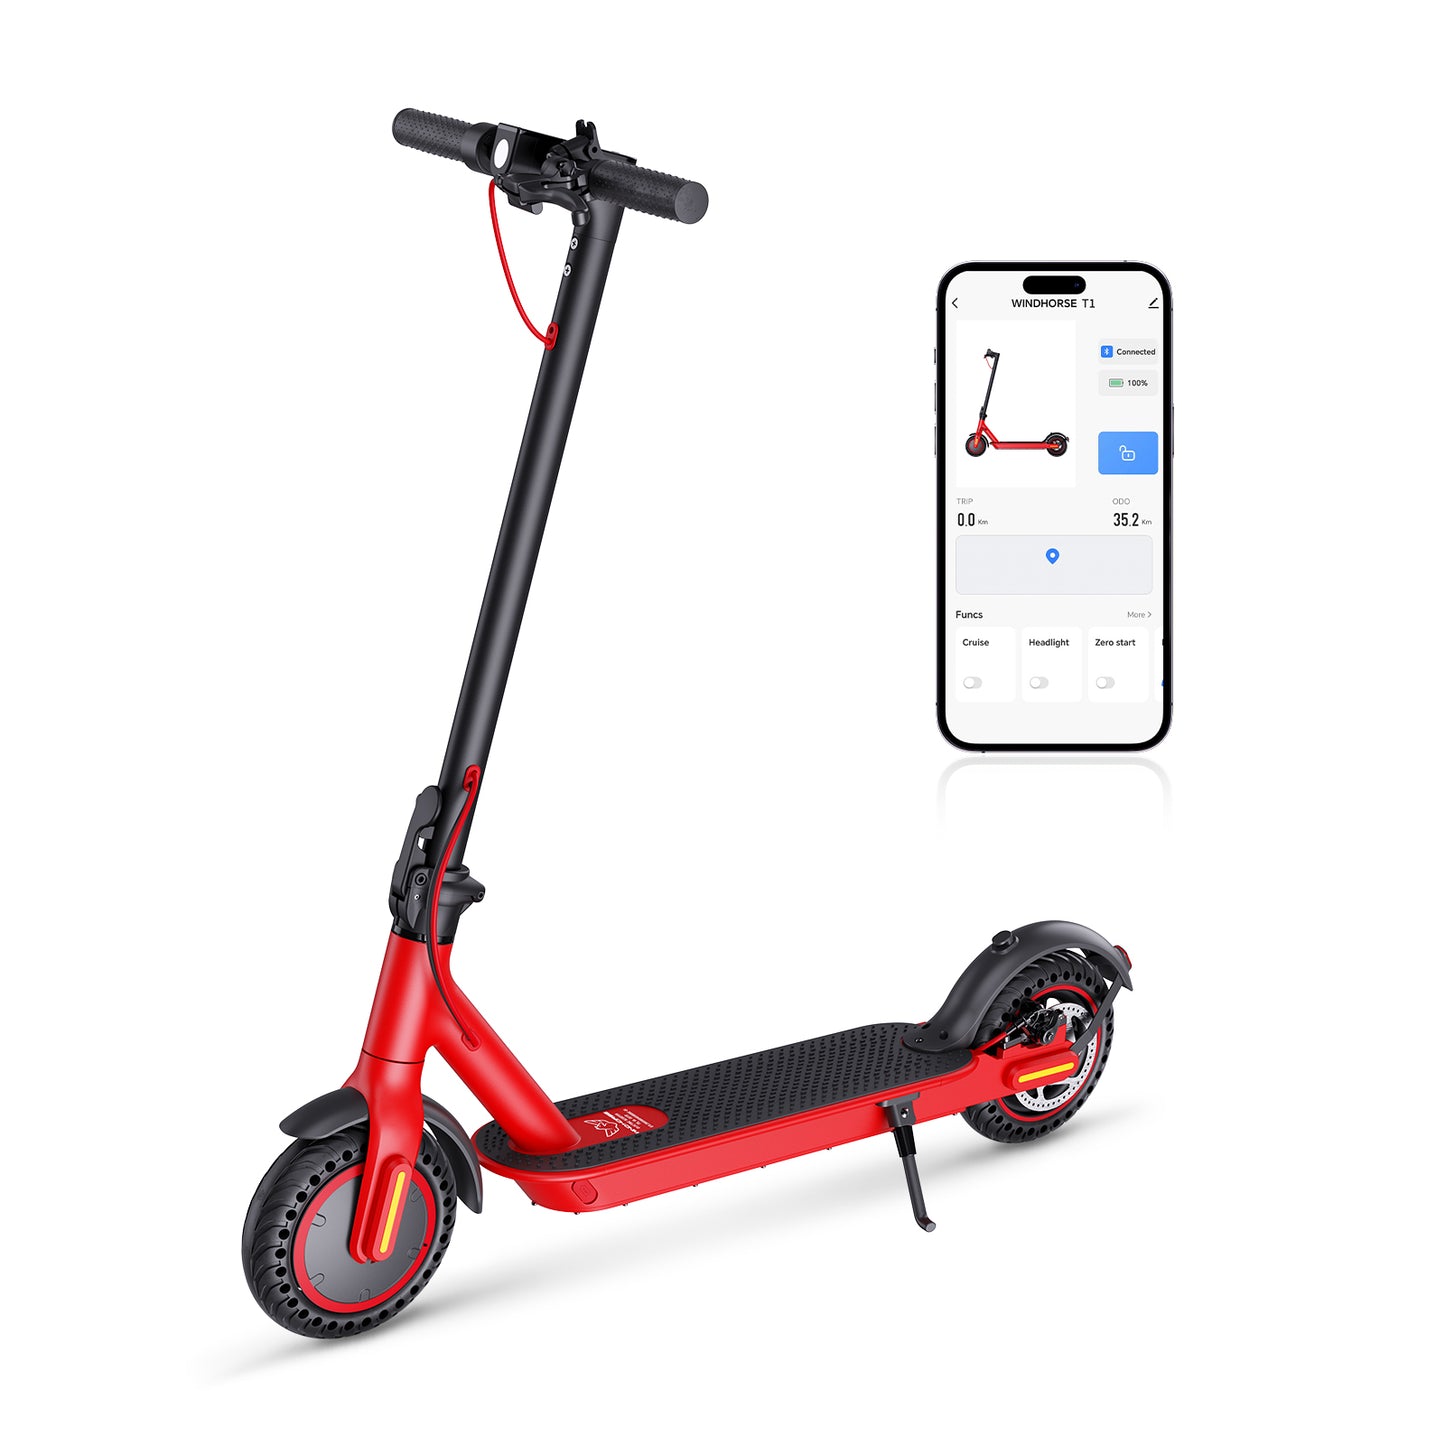 WINDHORSE Electric Scooter, 350W Motor Electric KickScooter, 15-20 Miles Range & 15.5 MPH Foldable Electric Scooter, 8.5" Solid Tire Cruise Control Disk Brake Commuter E-Scooter for Adults, T1